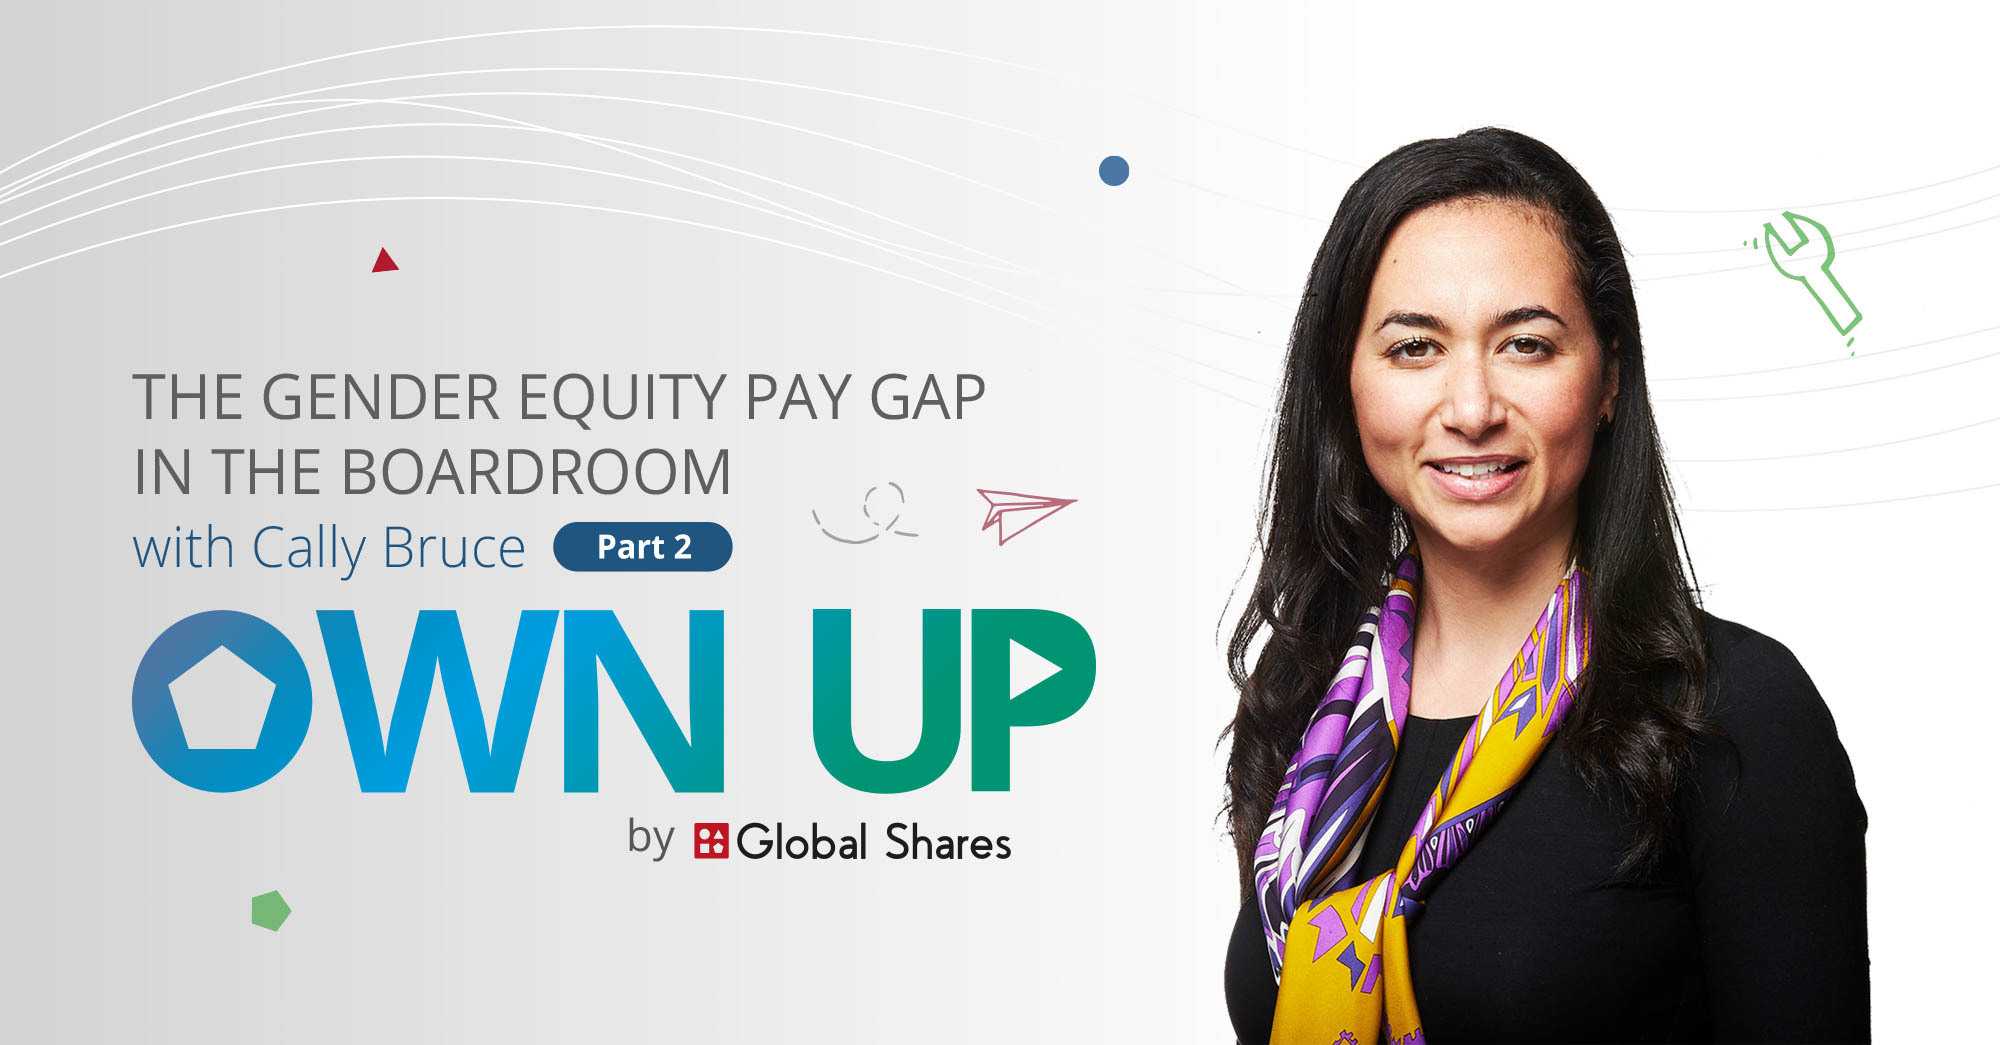 Own Up Podcast: The Gender Equity Pay Gap with Cally Bruce